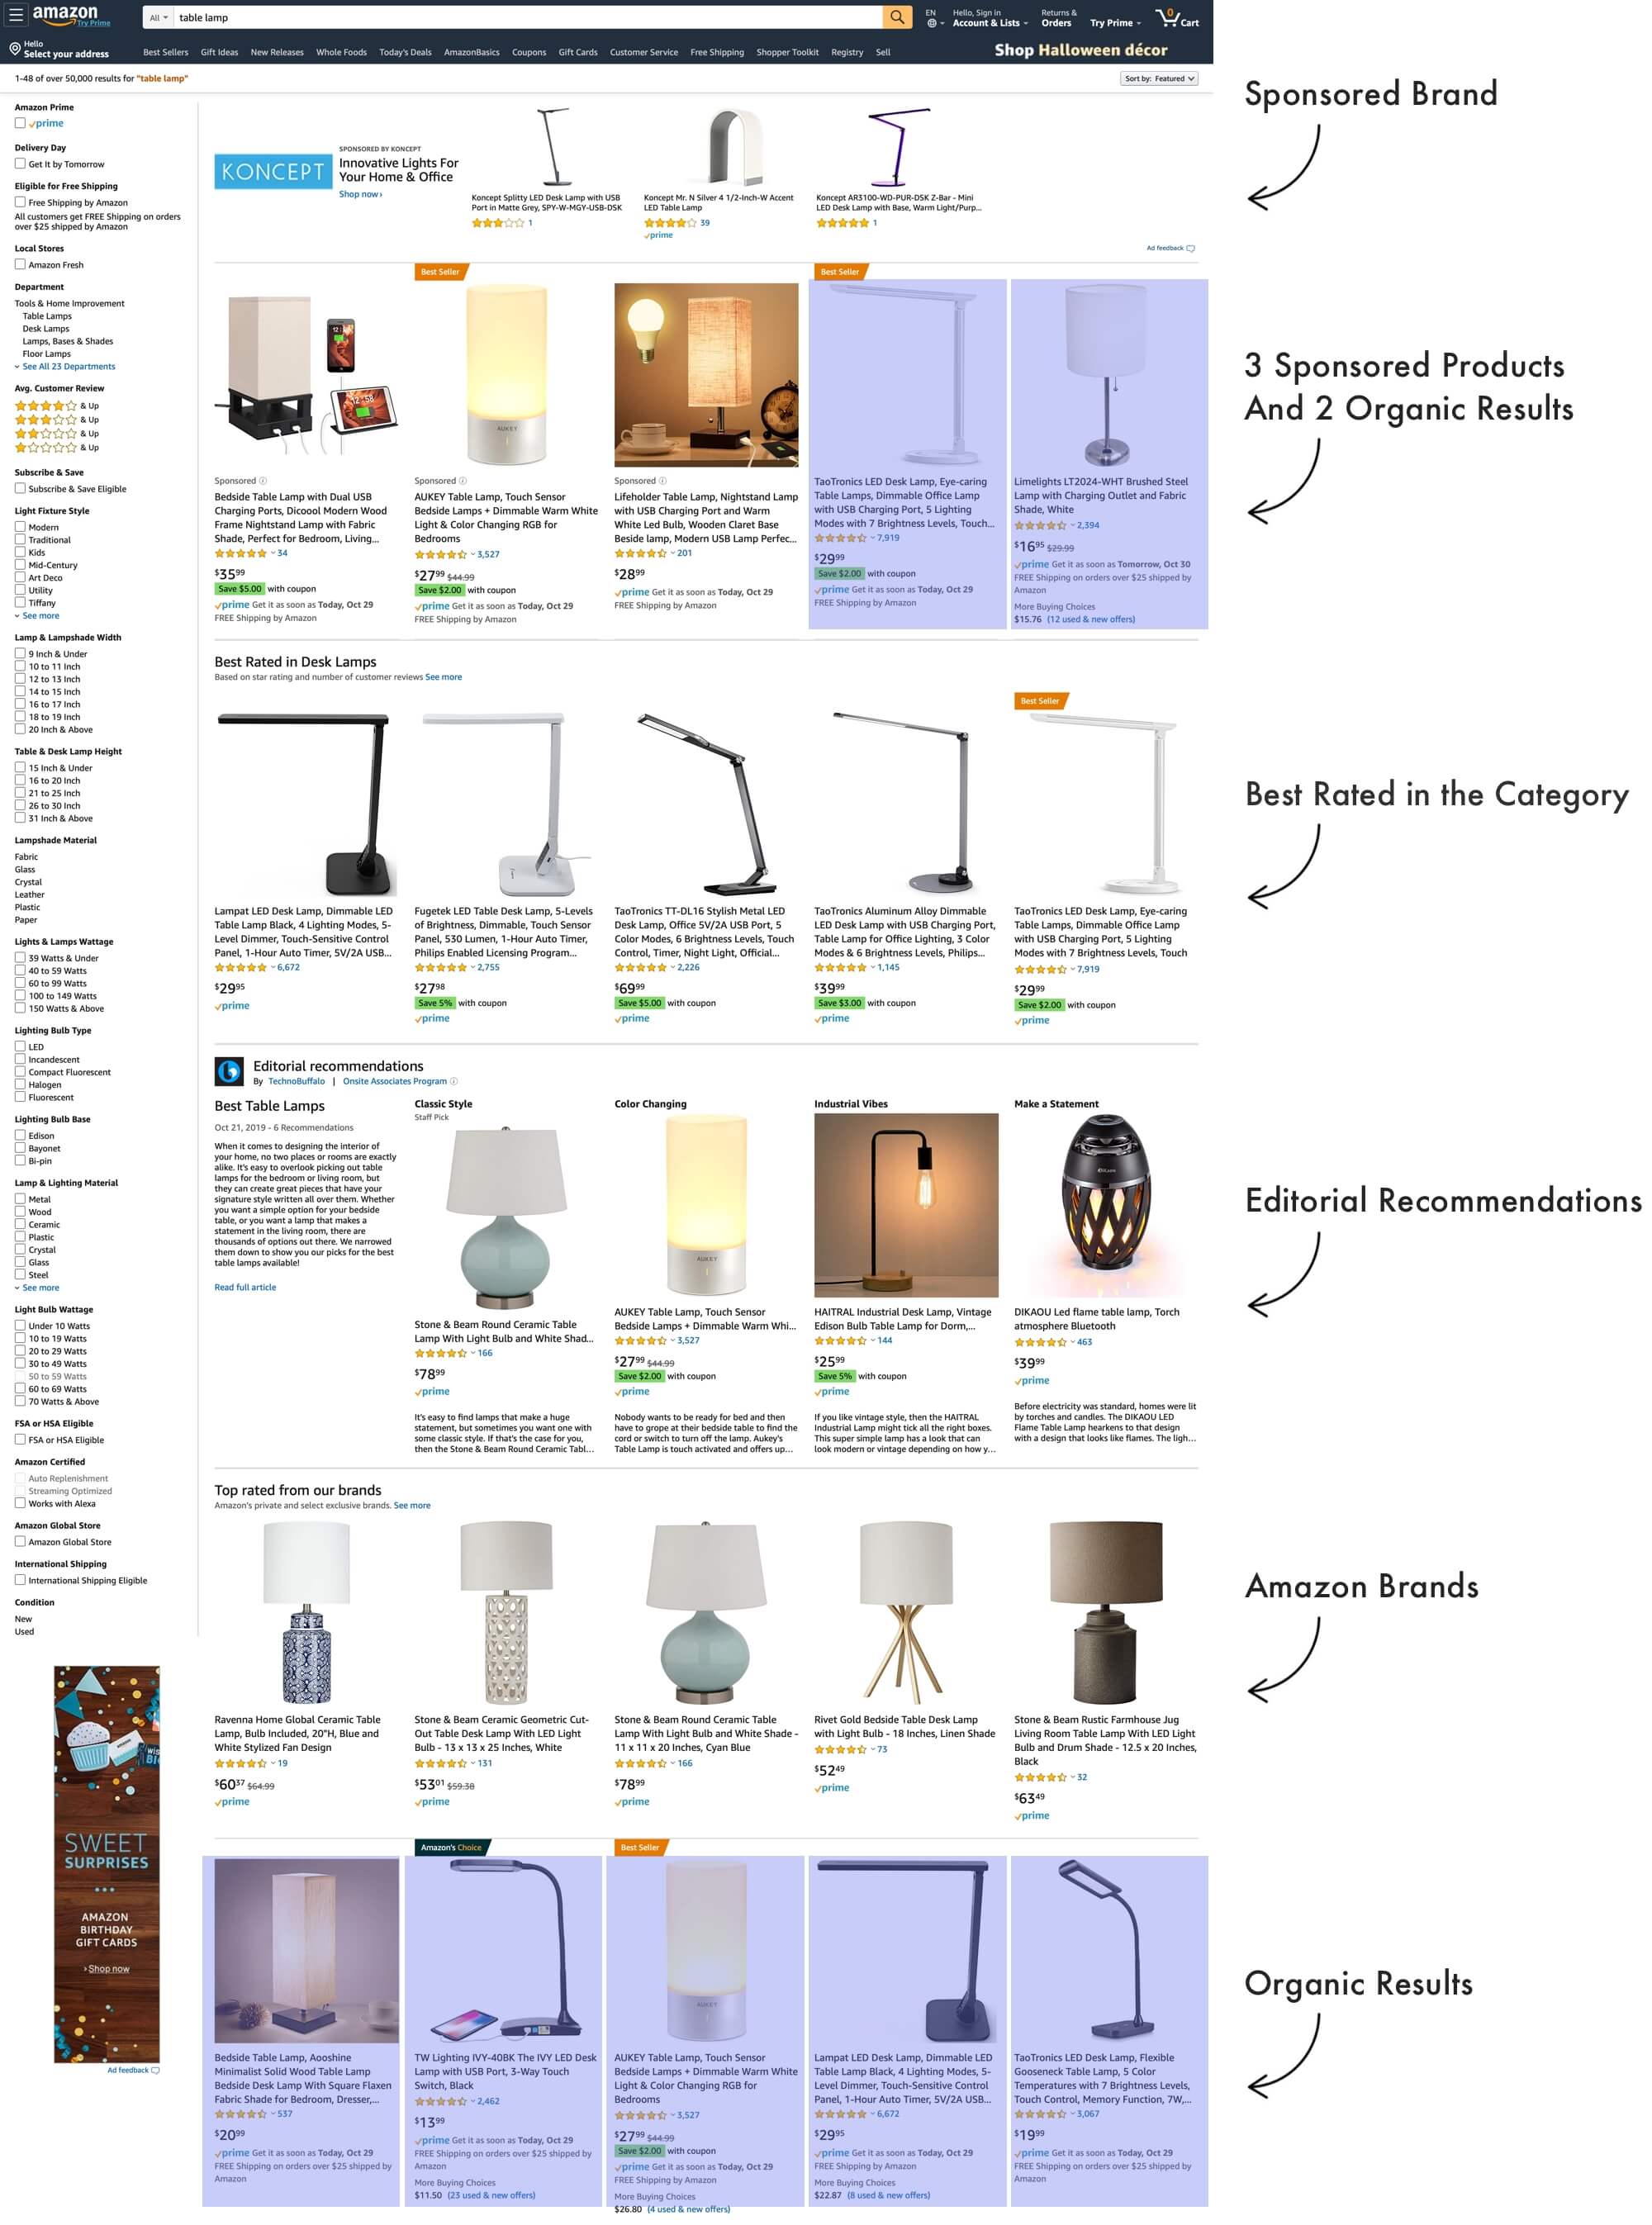 Amazon advertising placement examples